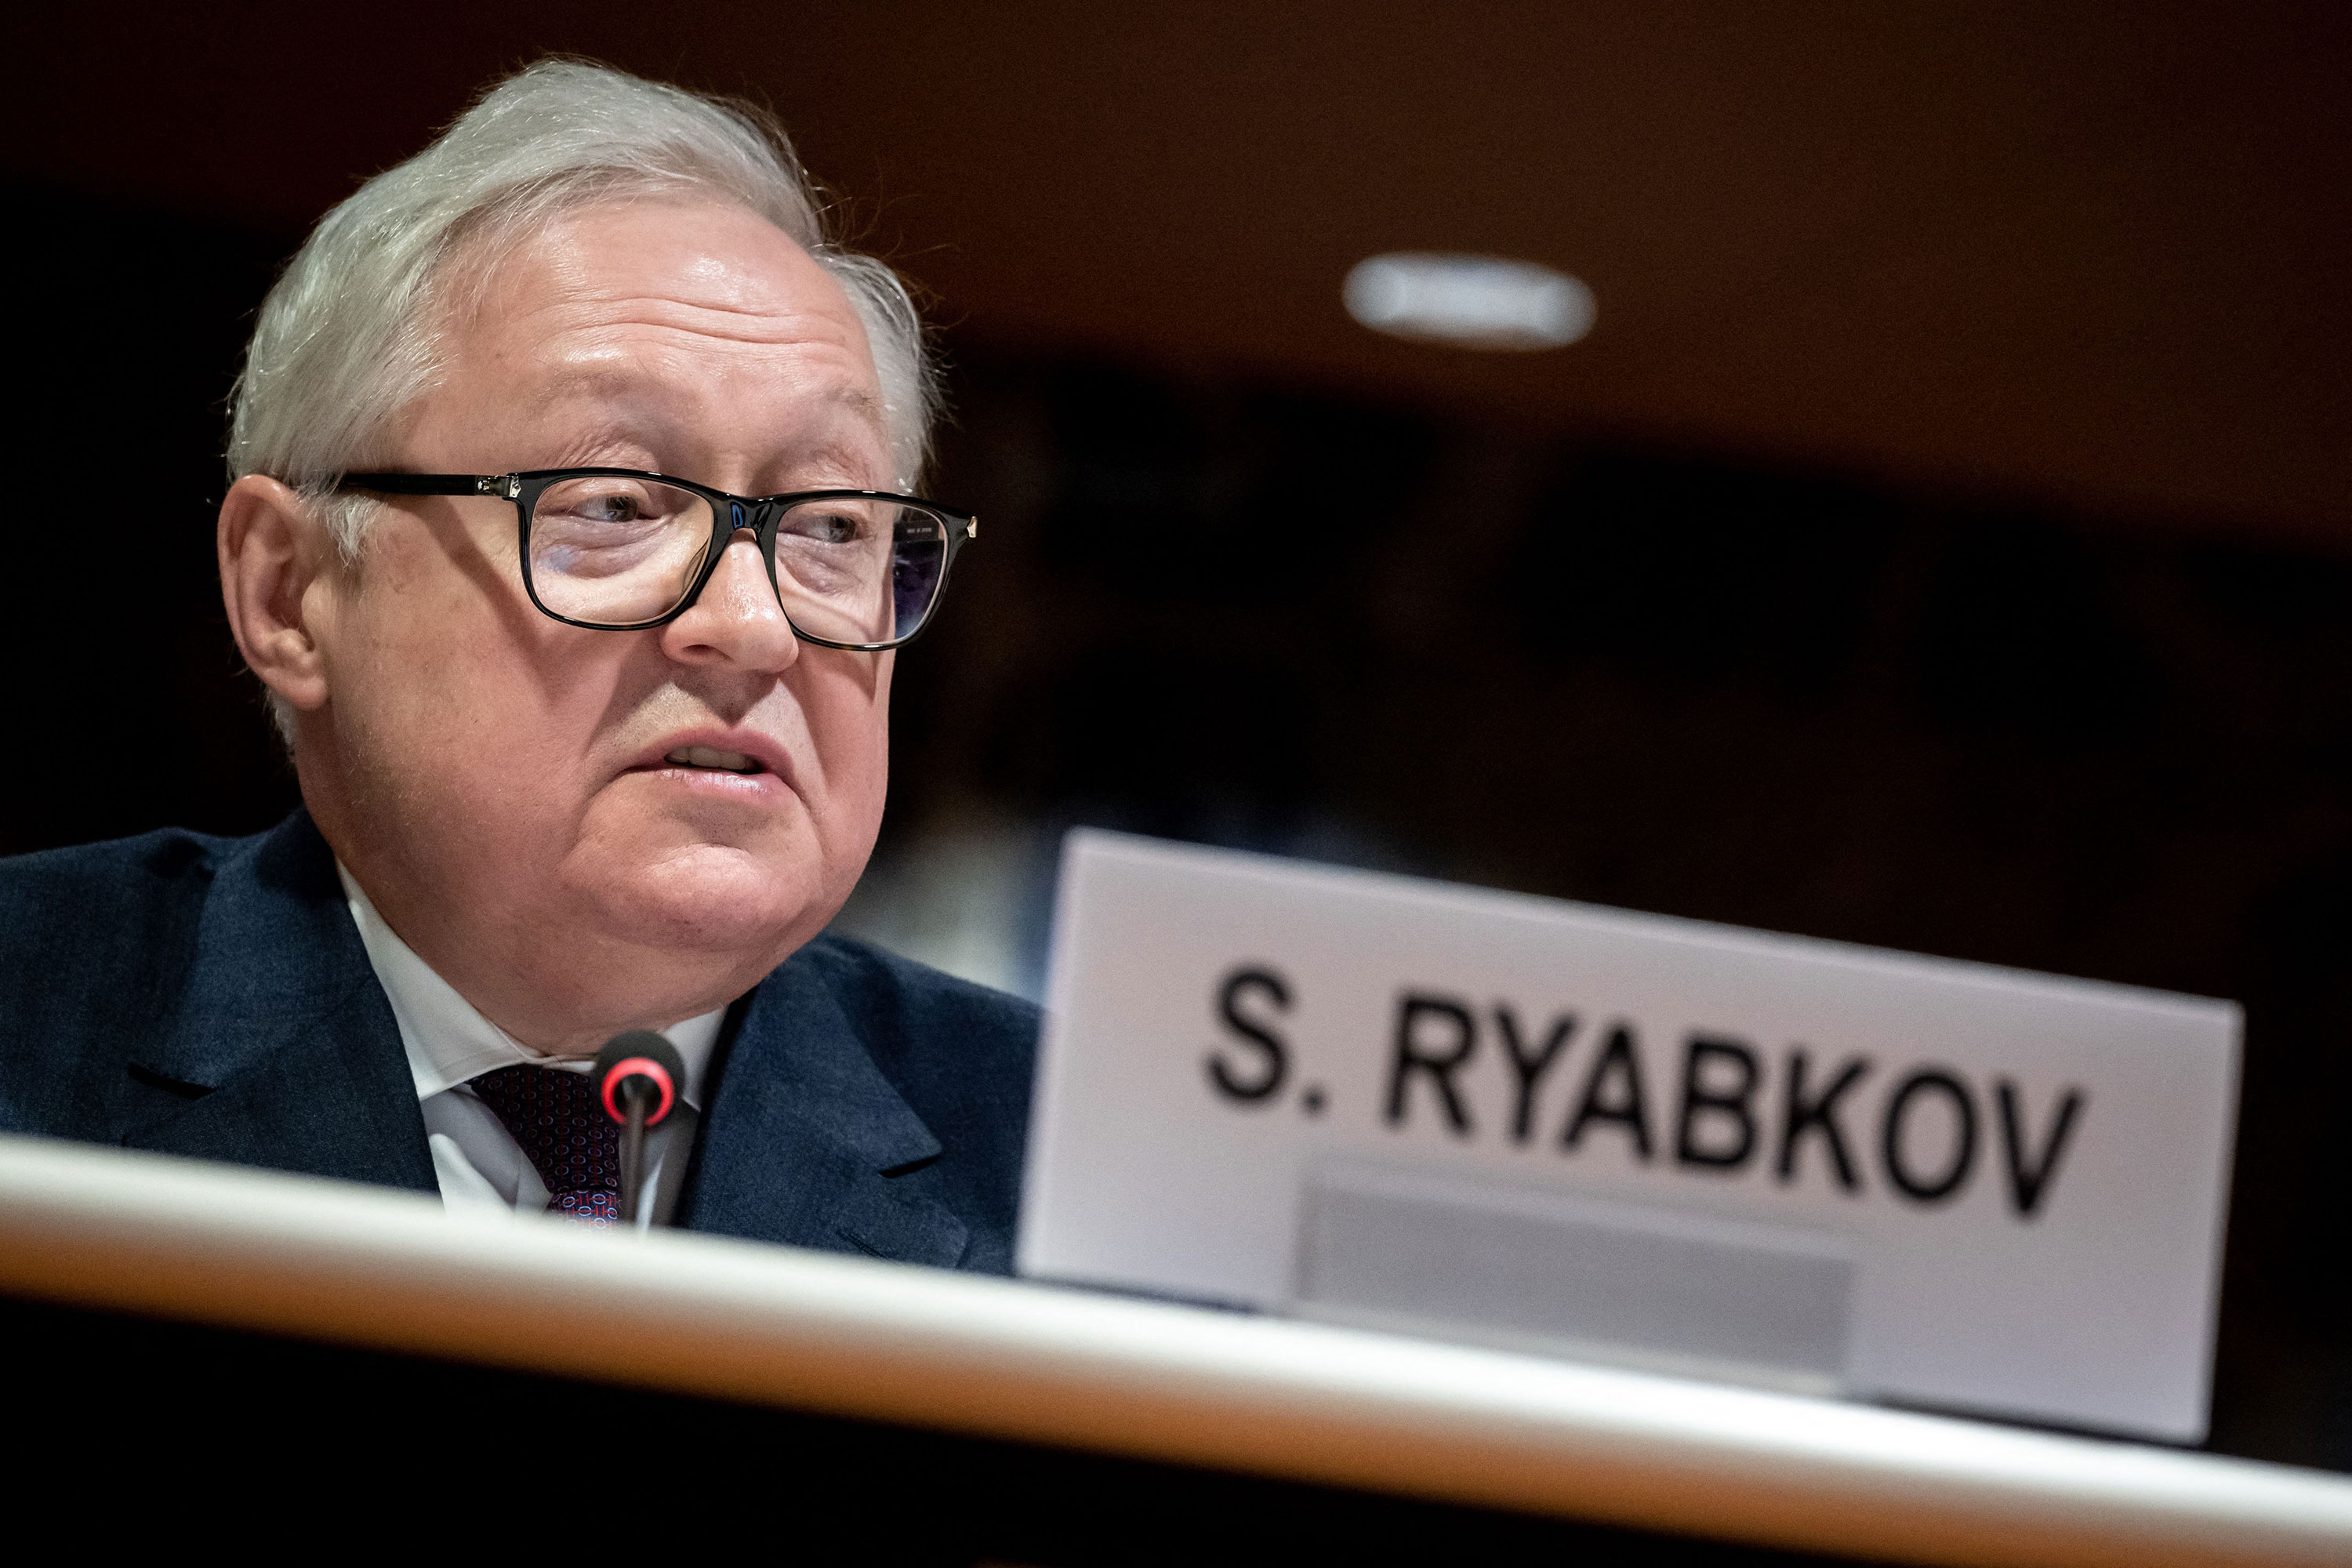 Russian Deputy Foreign Minister Sergei Ryabkov delivers a speech during a session of the UN Conference on Disarmament in Geneva, Switzerland on March 2. 